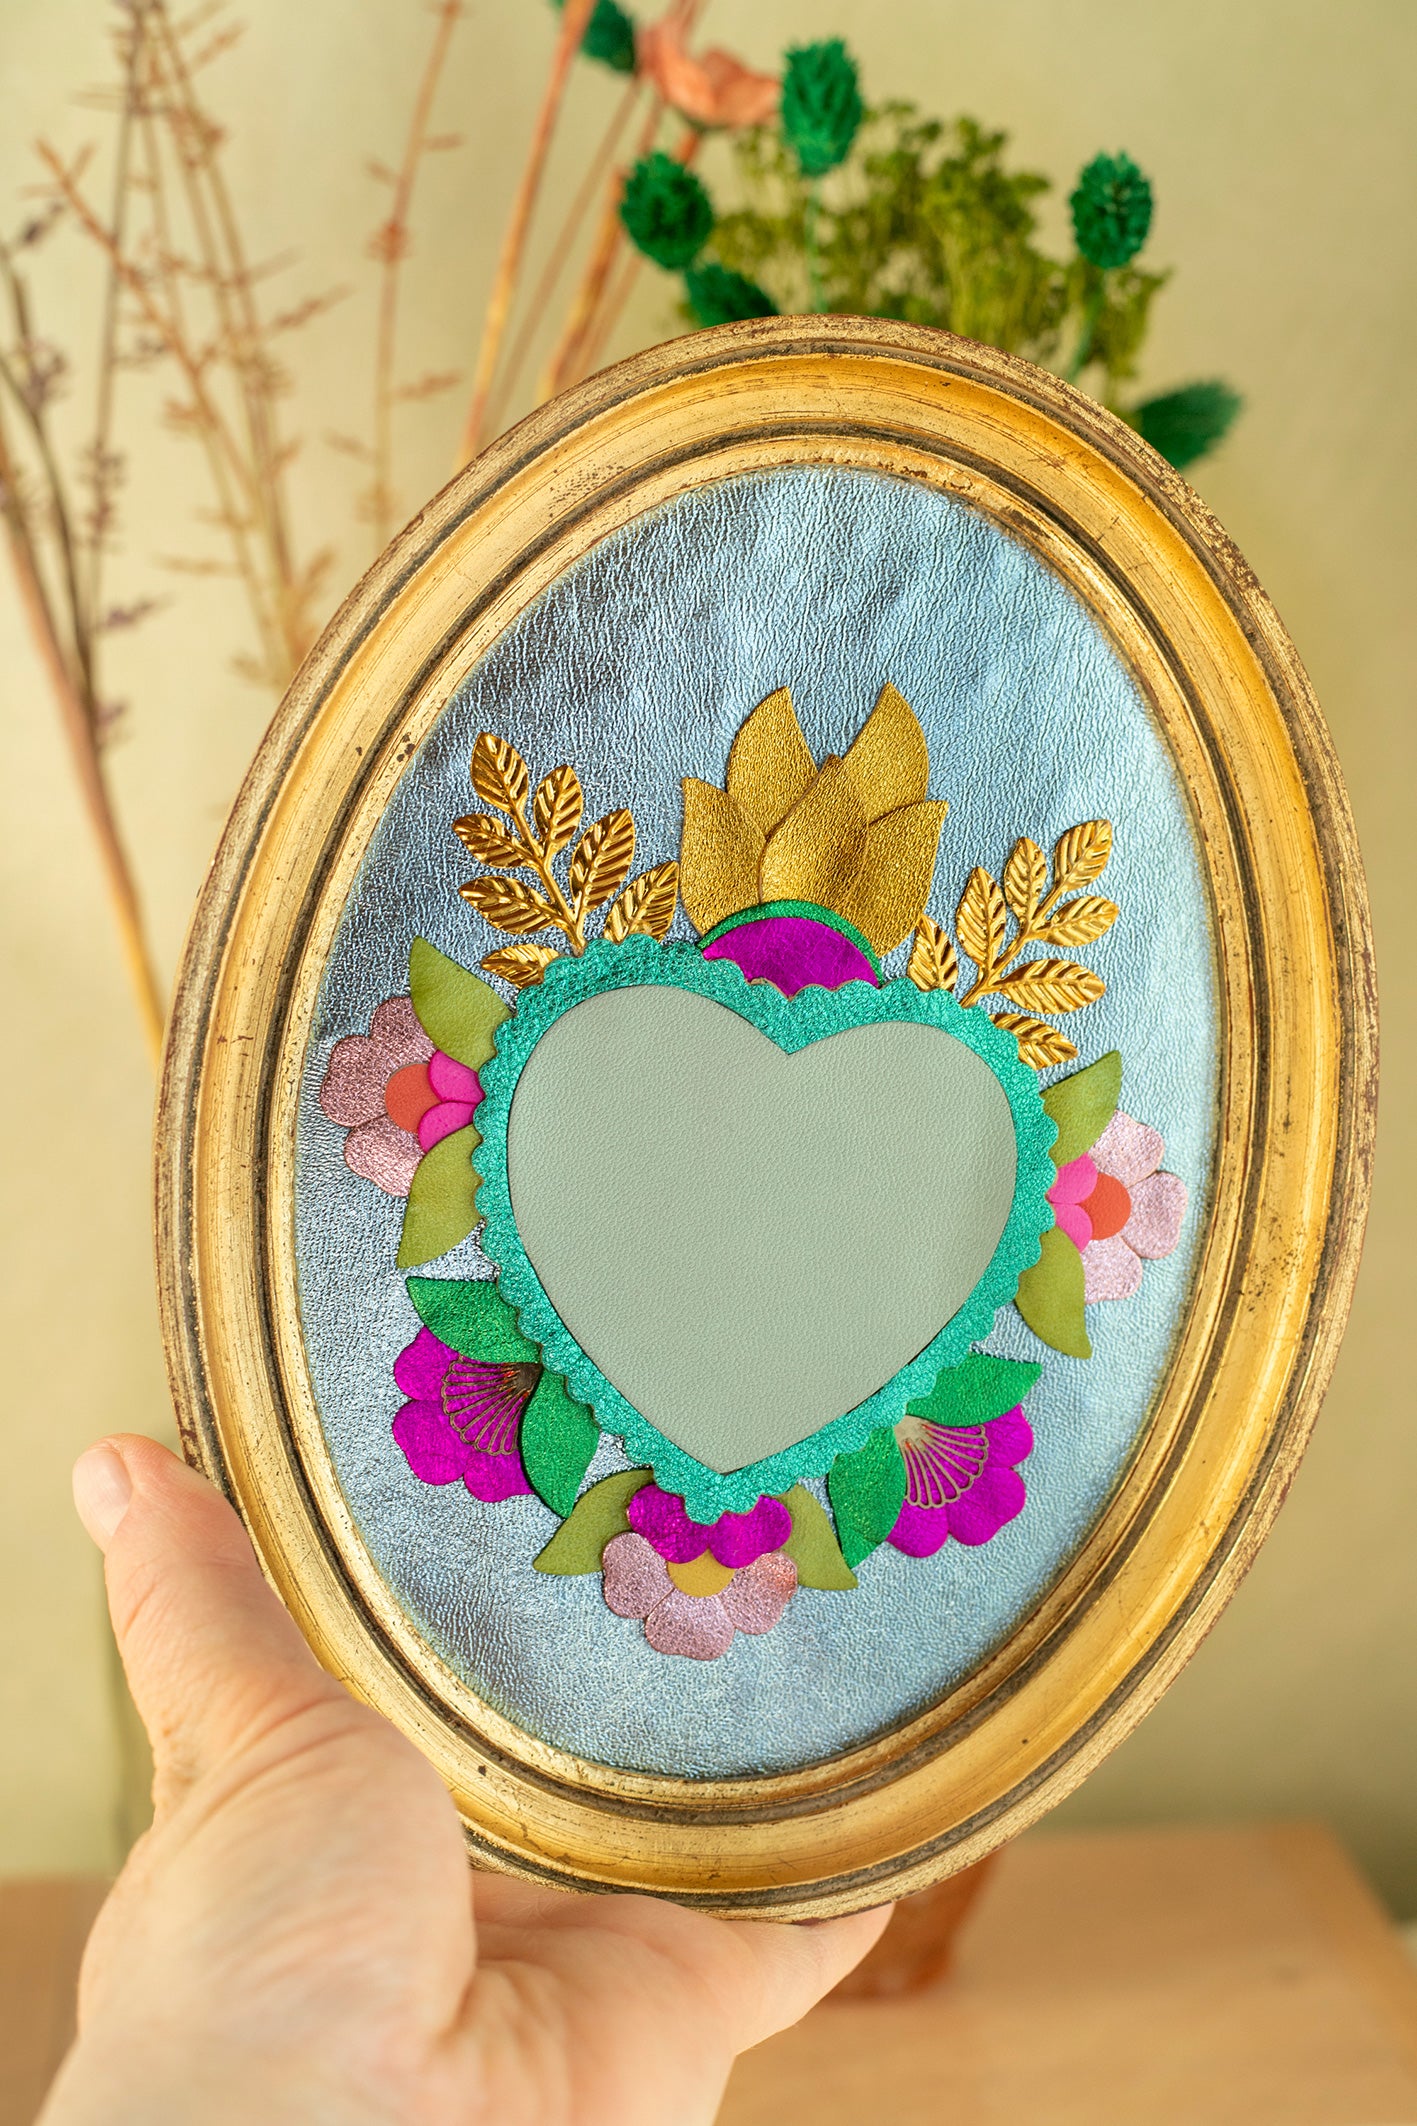 Ex-Voto Painting The Flowering Heart